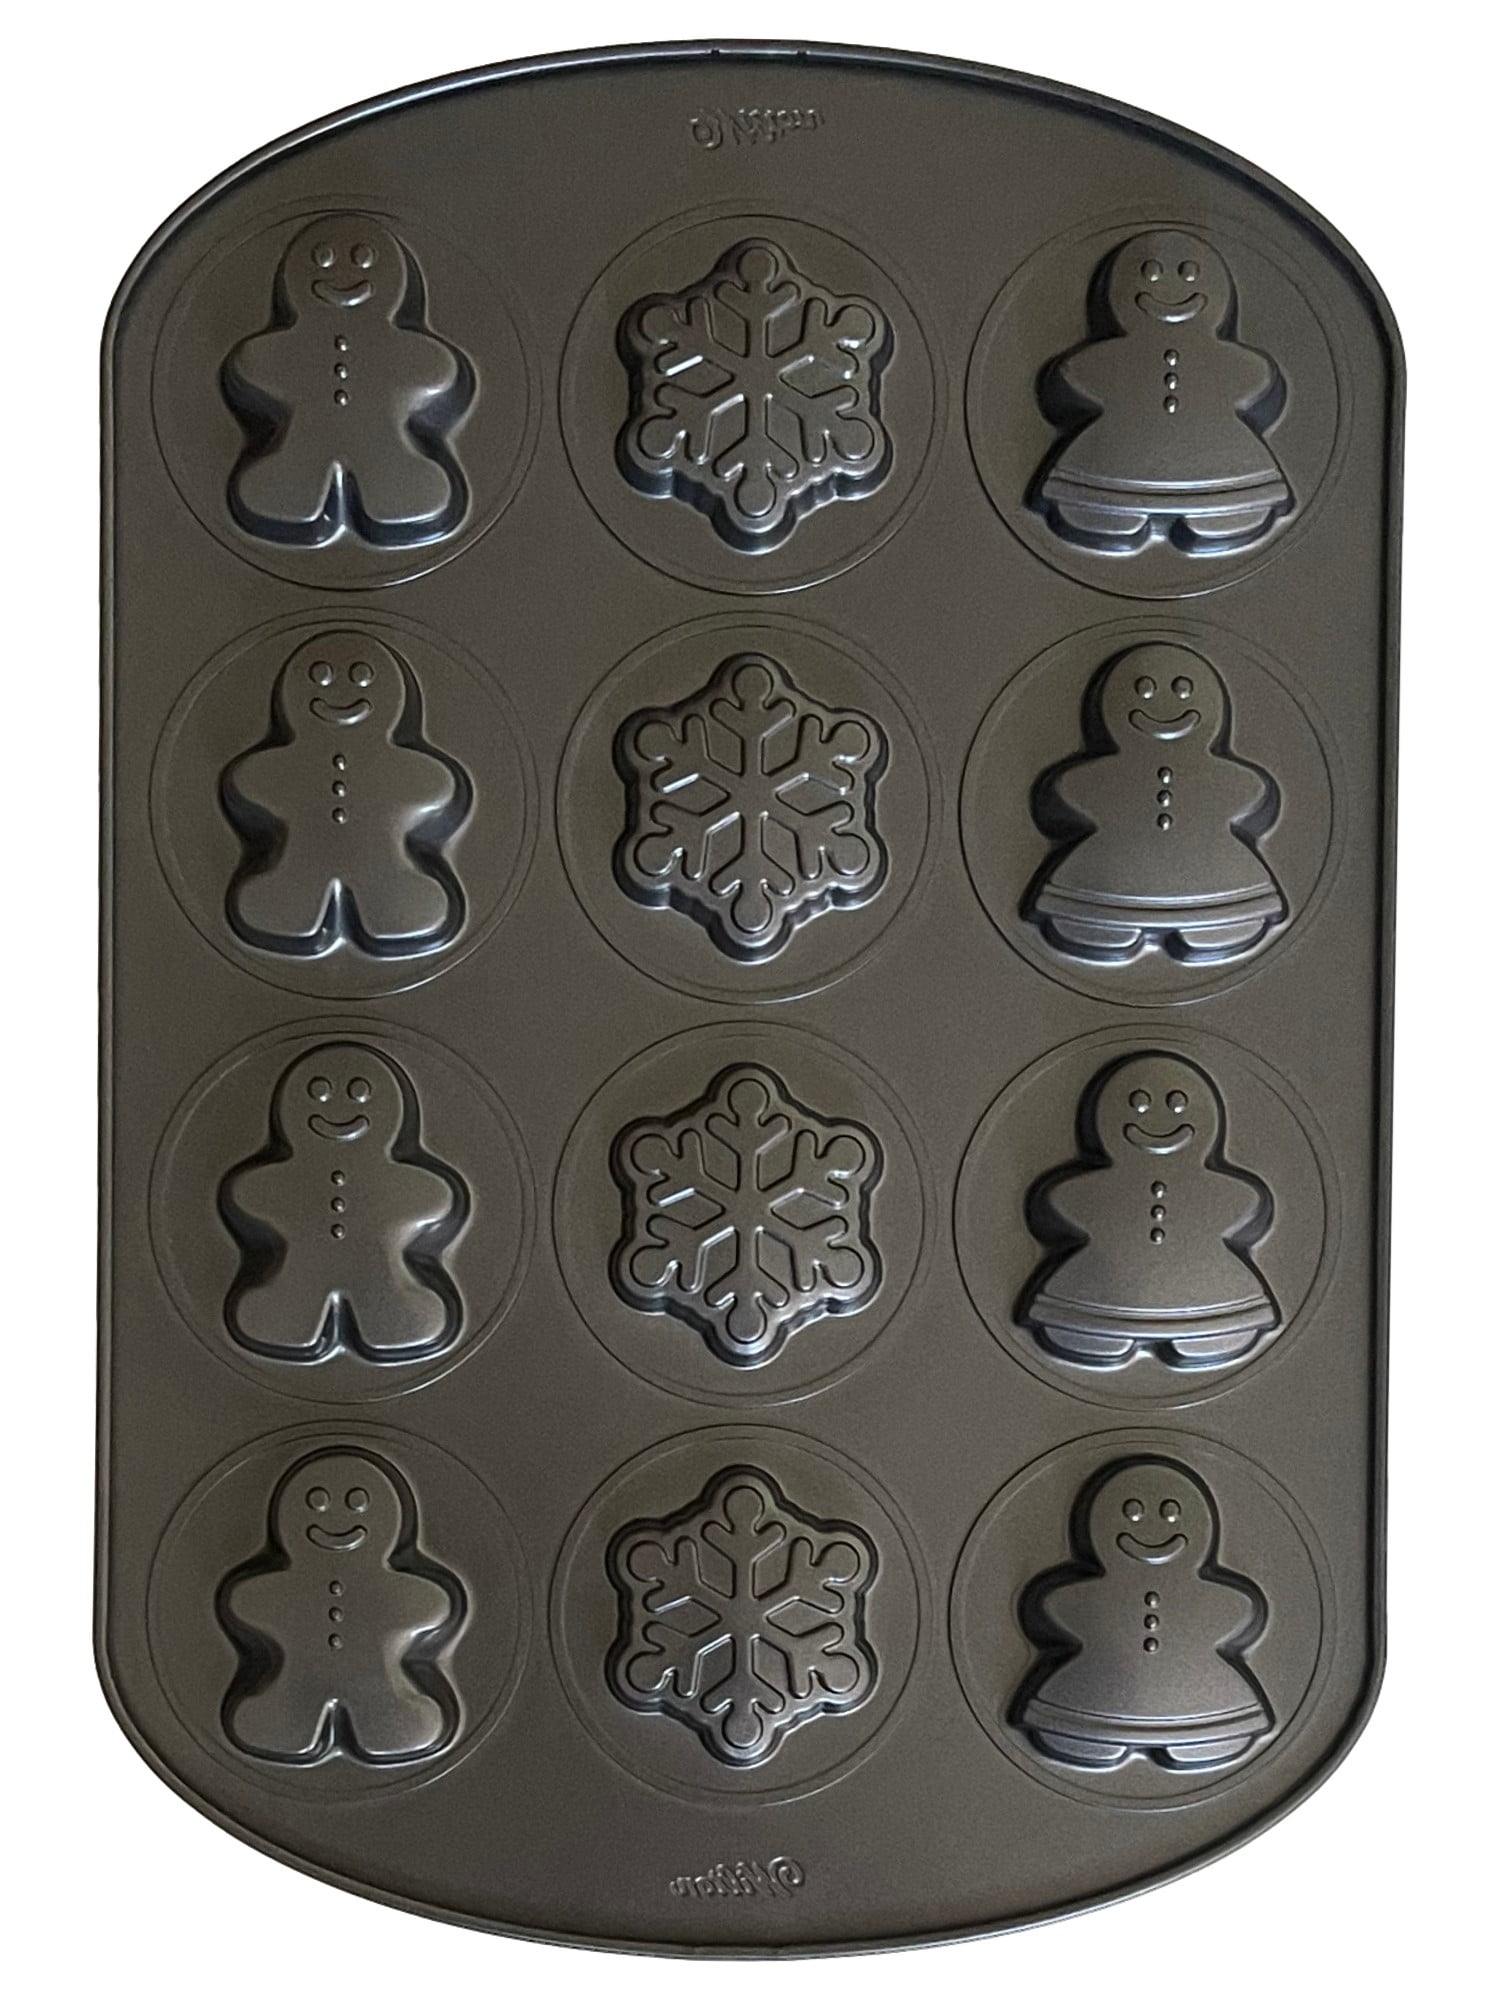 Wilton Gingerbread House Cookie Mold Pan Everyone loves to see an